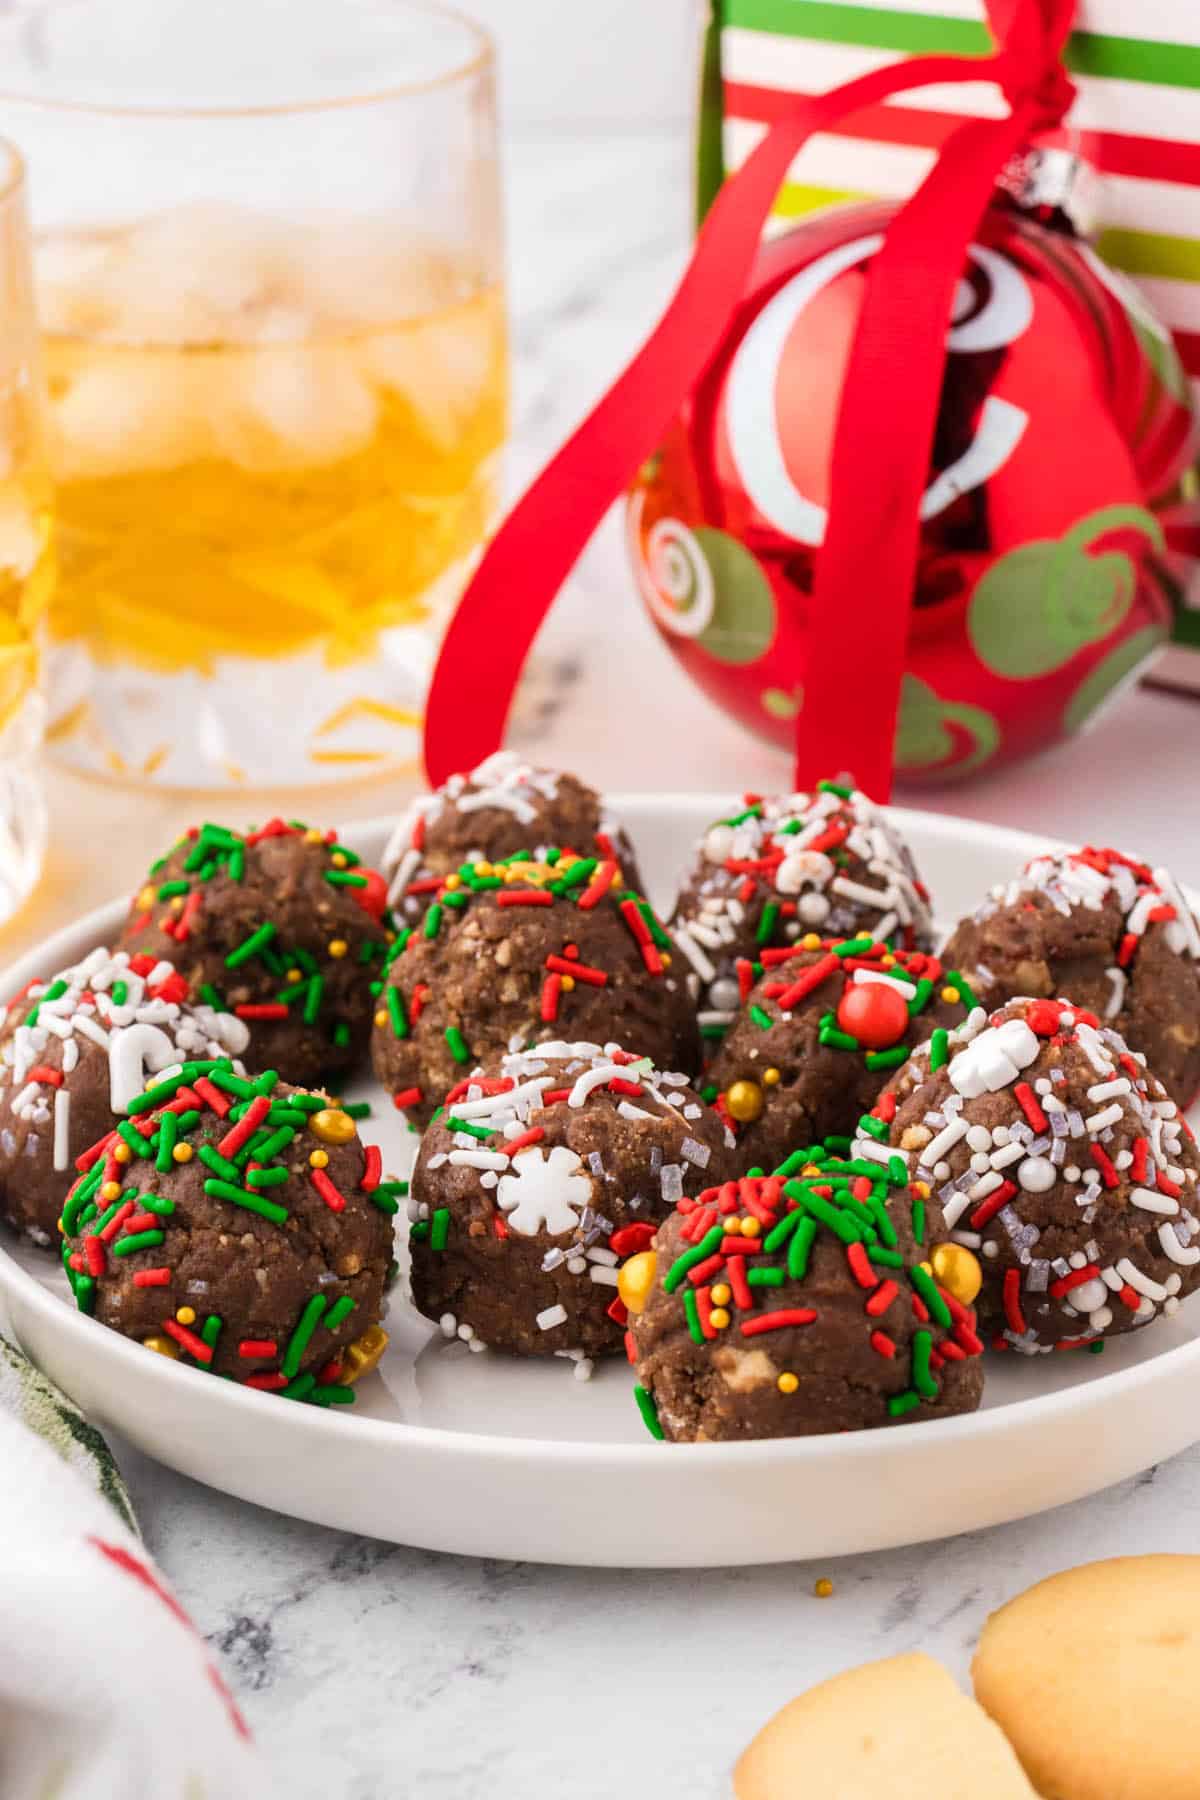 Bourbon balls decorated for Christmas on a plate.